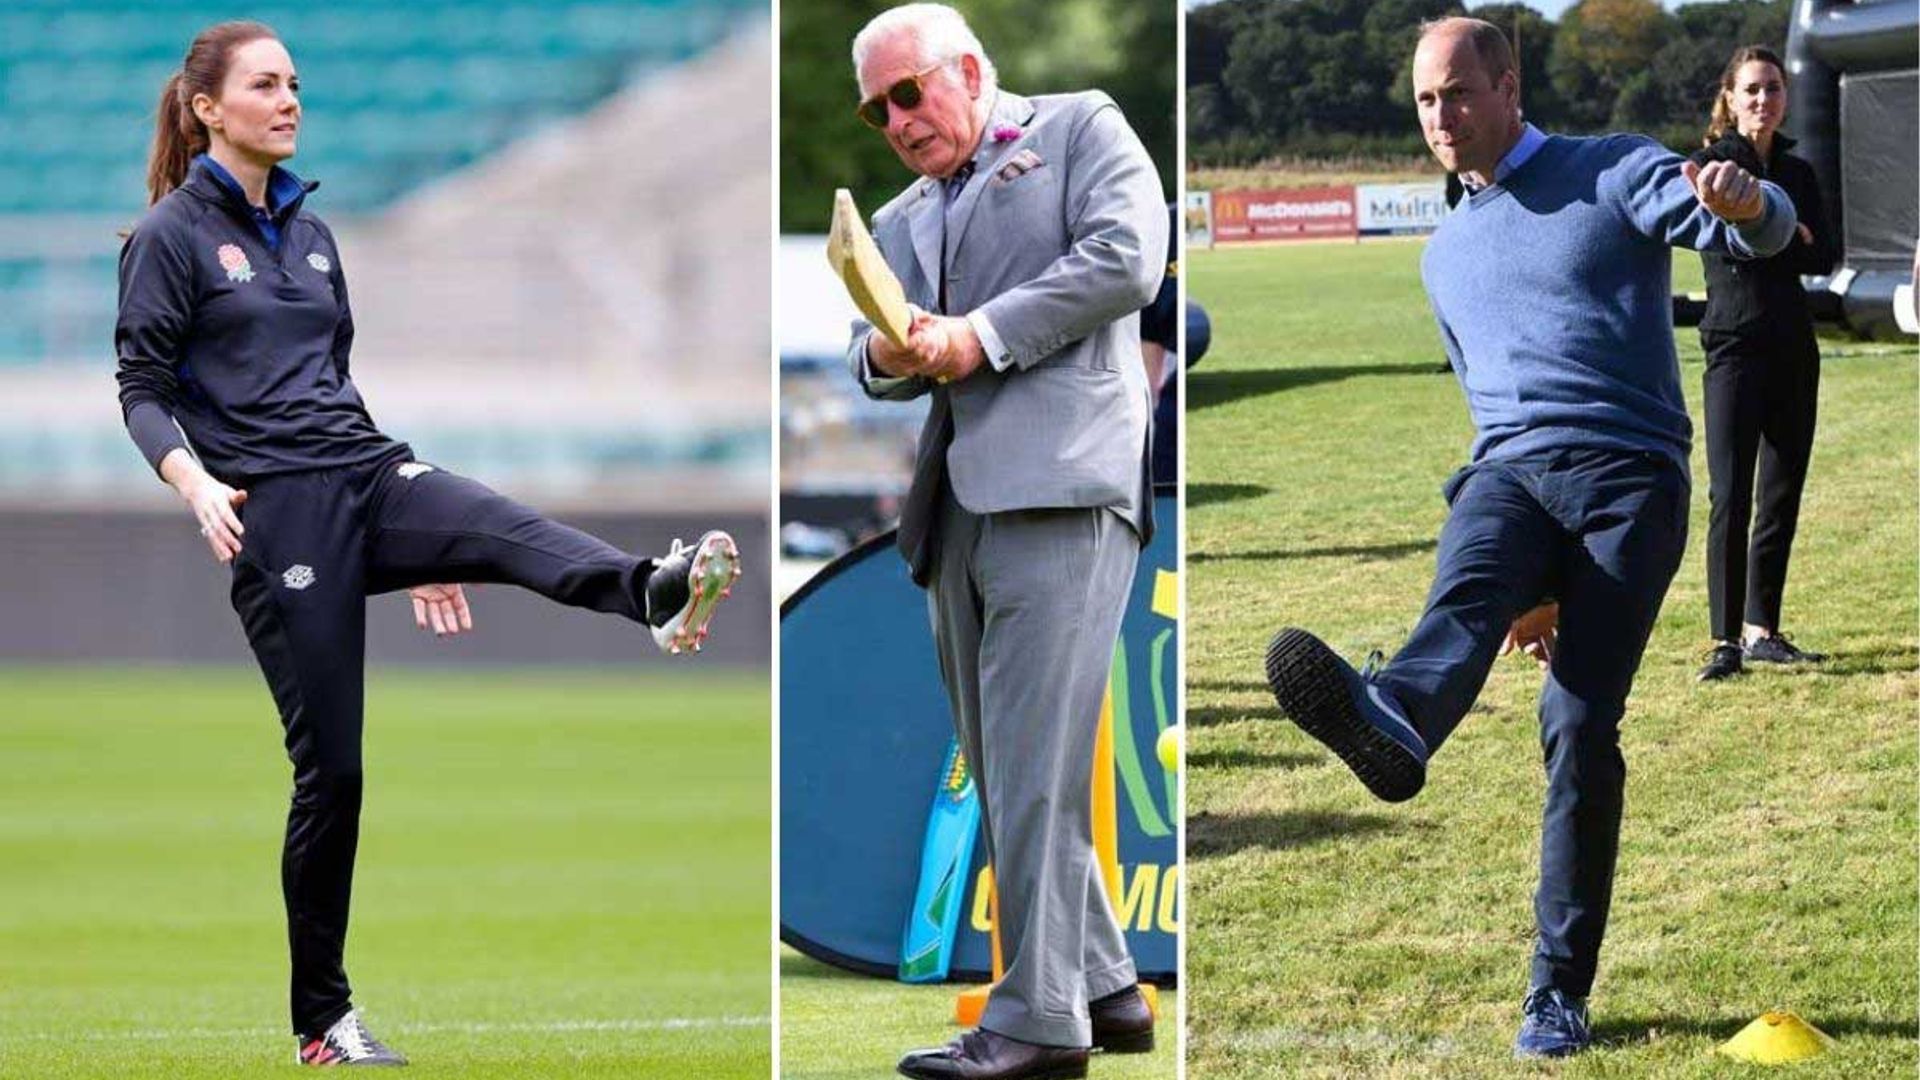 26 times the royals made us laugh while playing sports - see hilarious photos